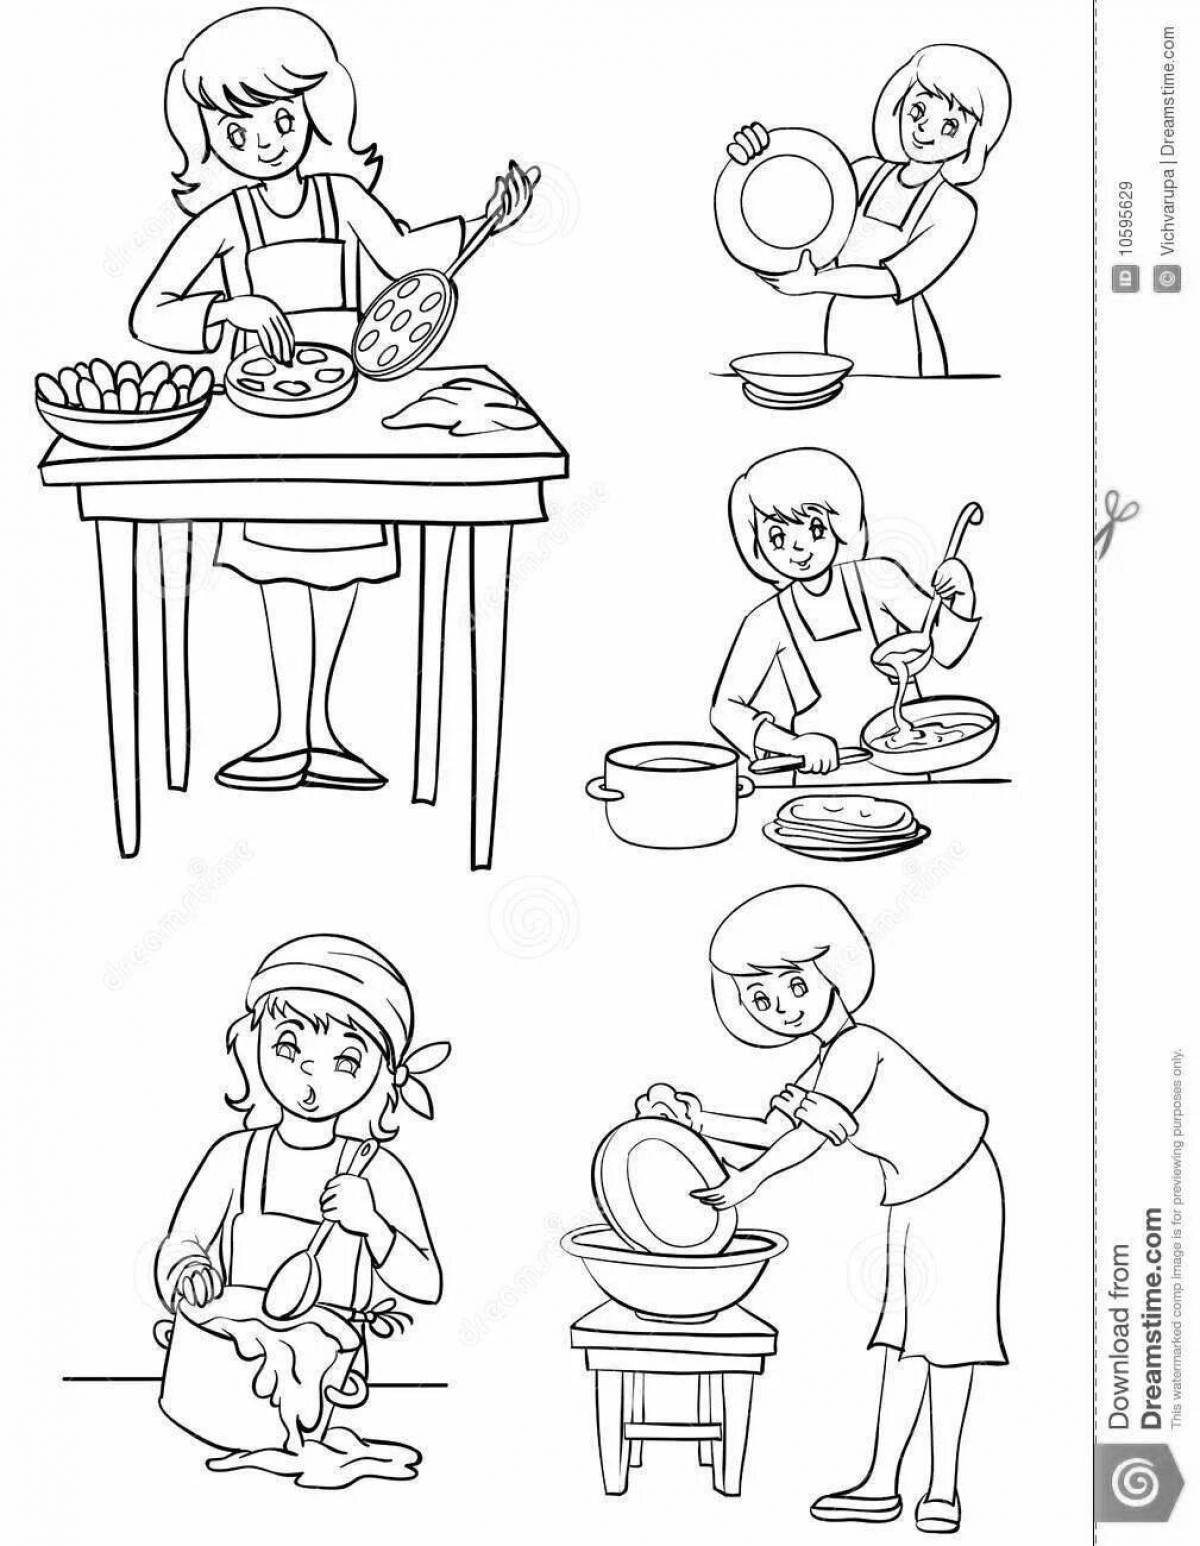 Updating the coloring page to help parents